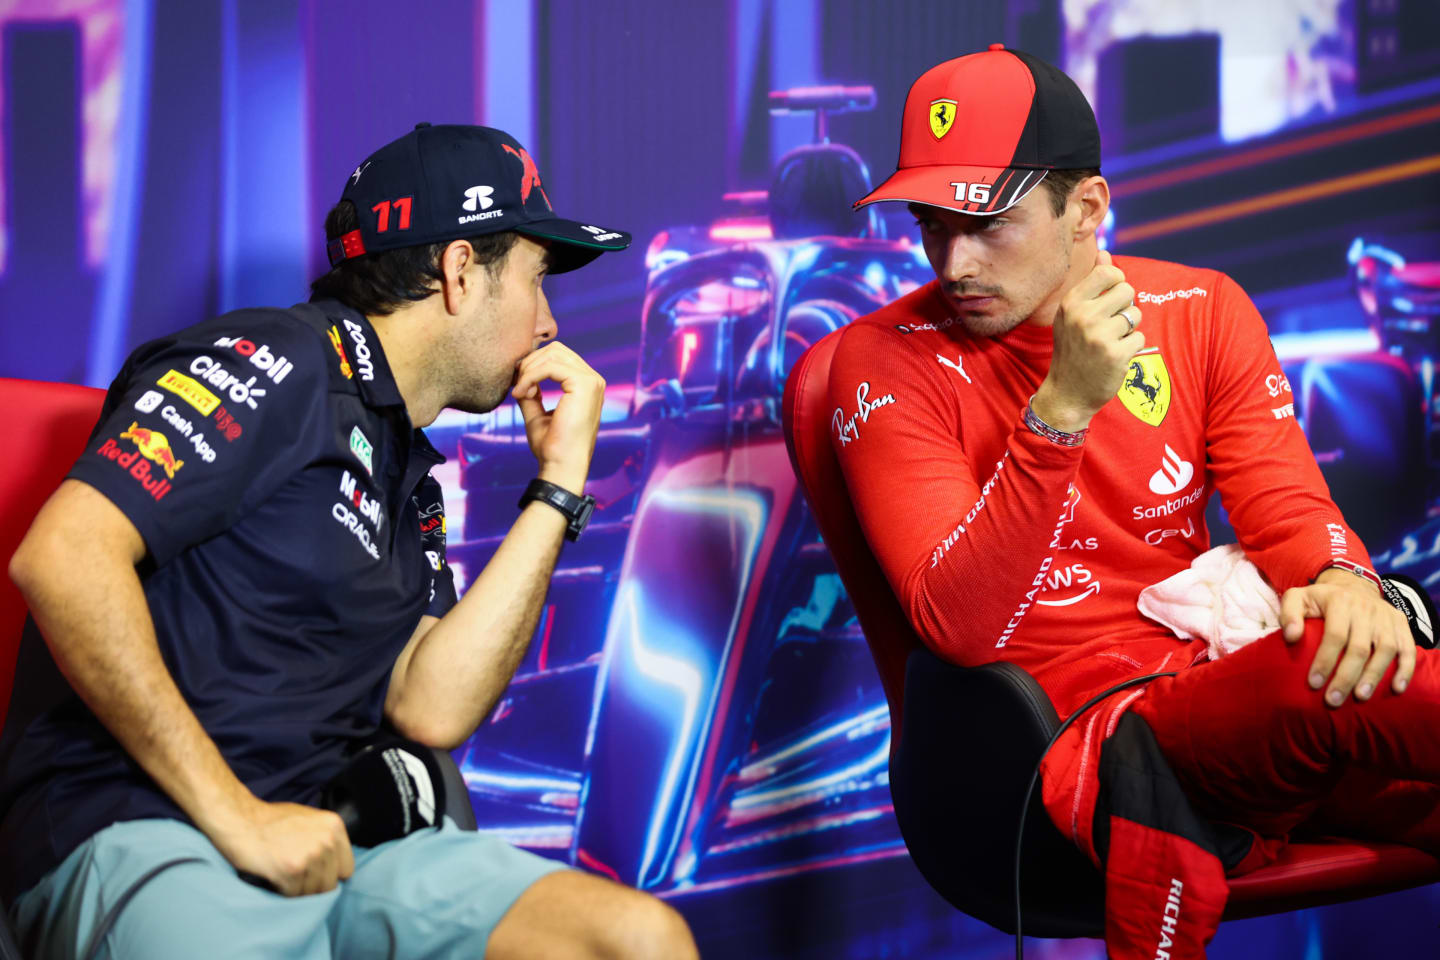 SINGAPORE, SINGAPORE - OCTOBER 01: Pole position qualifier Charles Leclerc of Monaco and Ferrari and Second placed qualifier Sergio Perez of Mexico and Oracle Red Bull Racing talk in the press conference after qualifying ahead of the F1 Grand Prix of Singapore at Marina Bay Street Circuit on October 01, 2022 in Singapore, Singapore. (Photo by Dan Istitene/Getty Images)